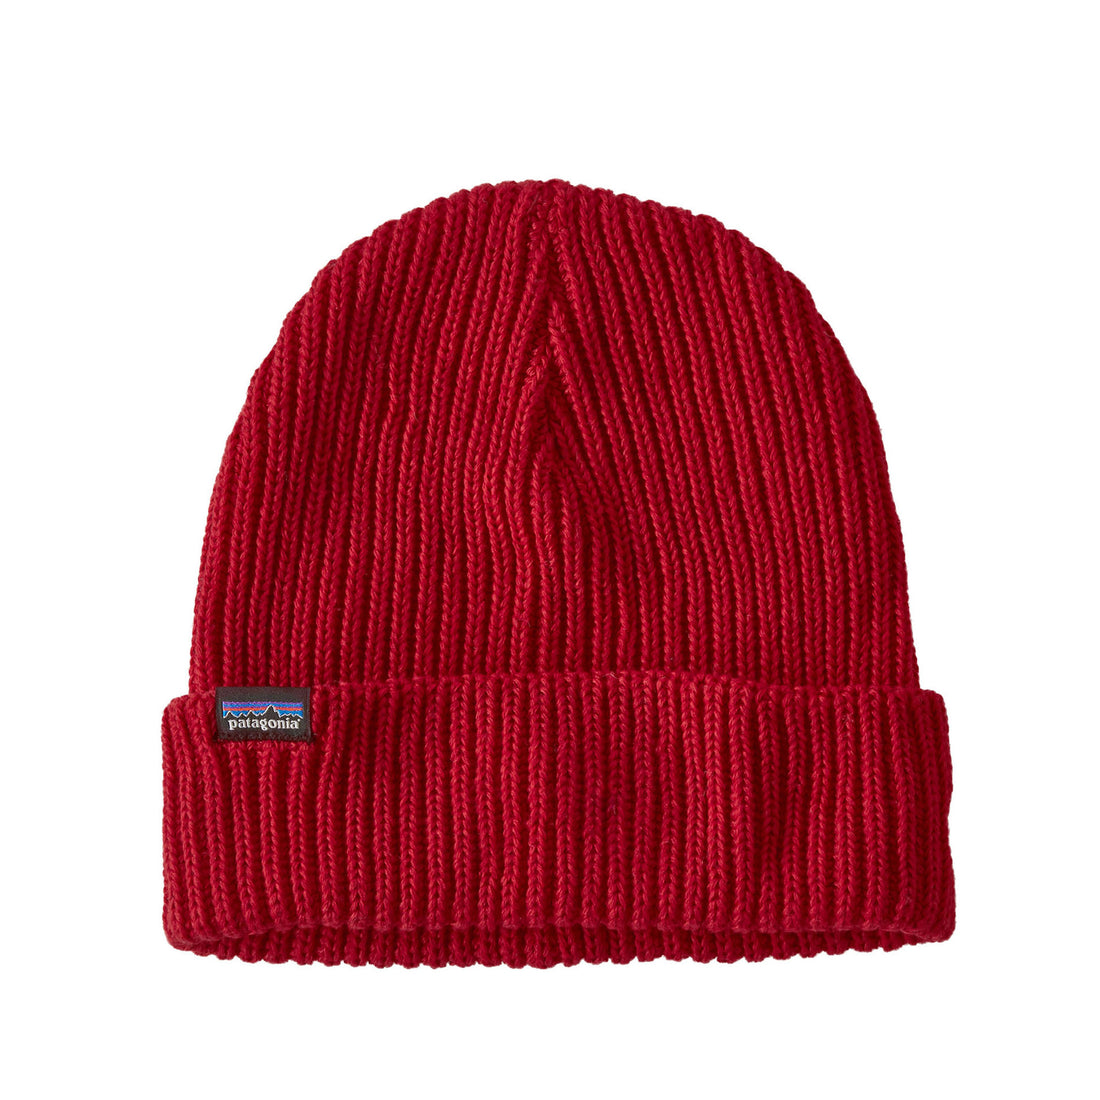 Fishermans Rolled Beanie - Touring Red